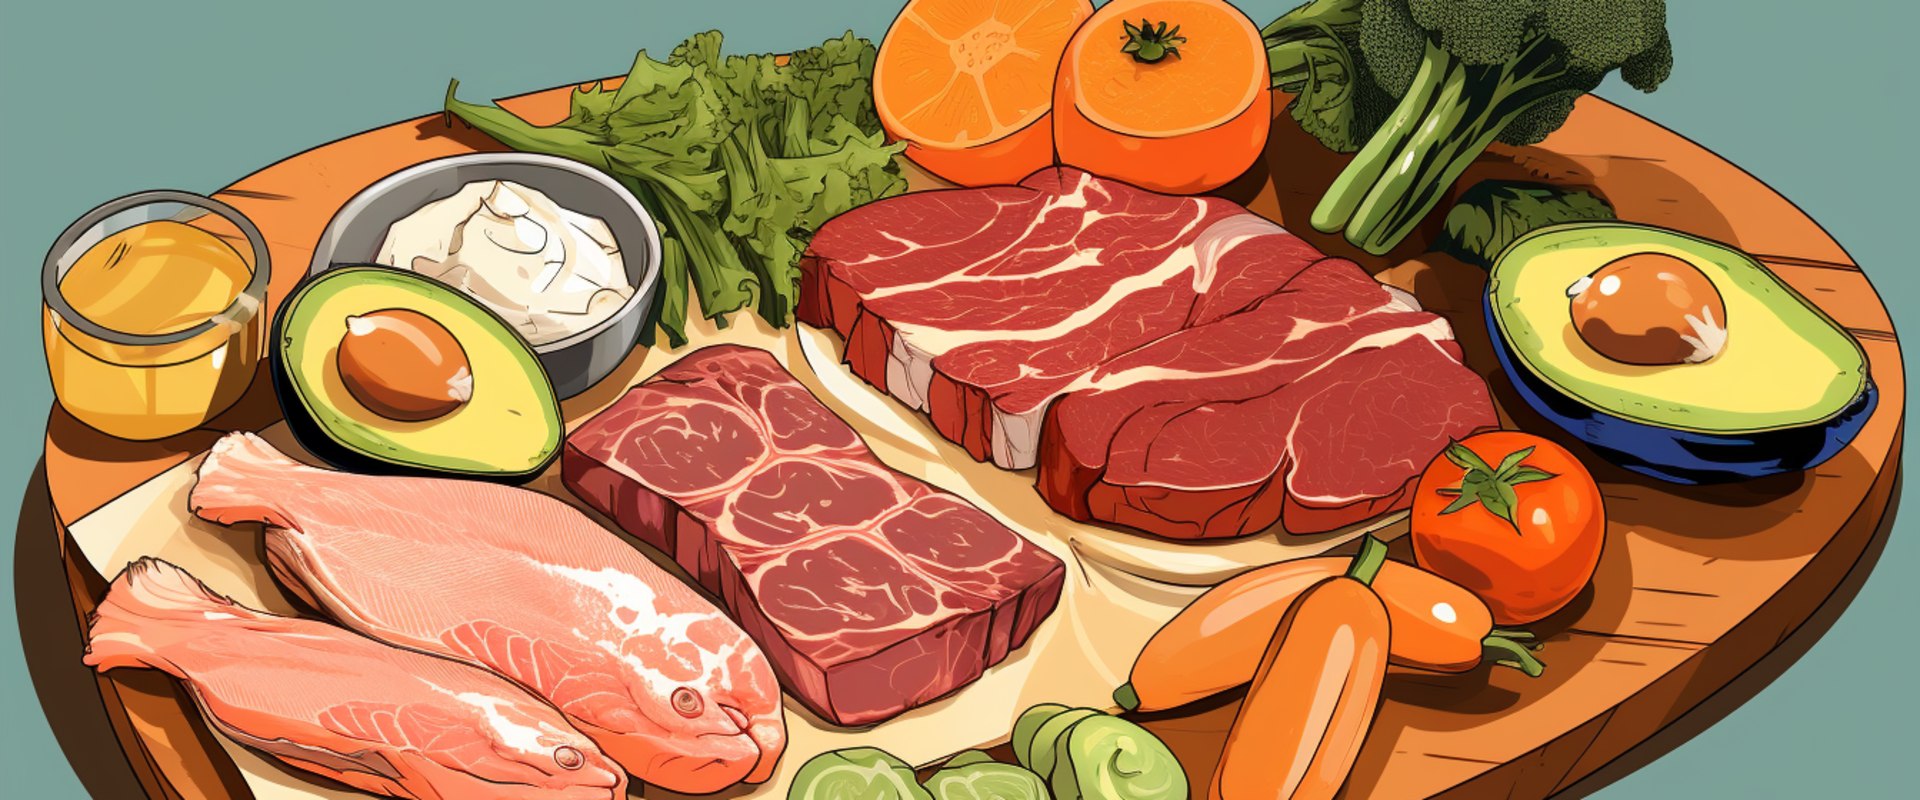 What are the drawbacks of the paleo diet?